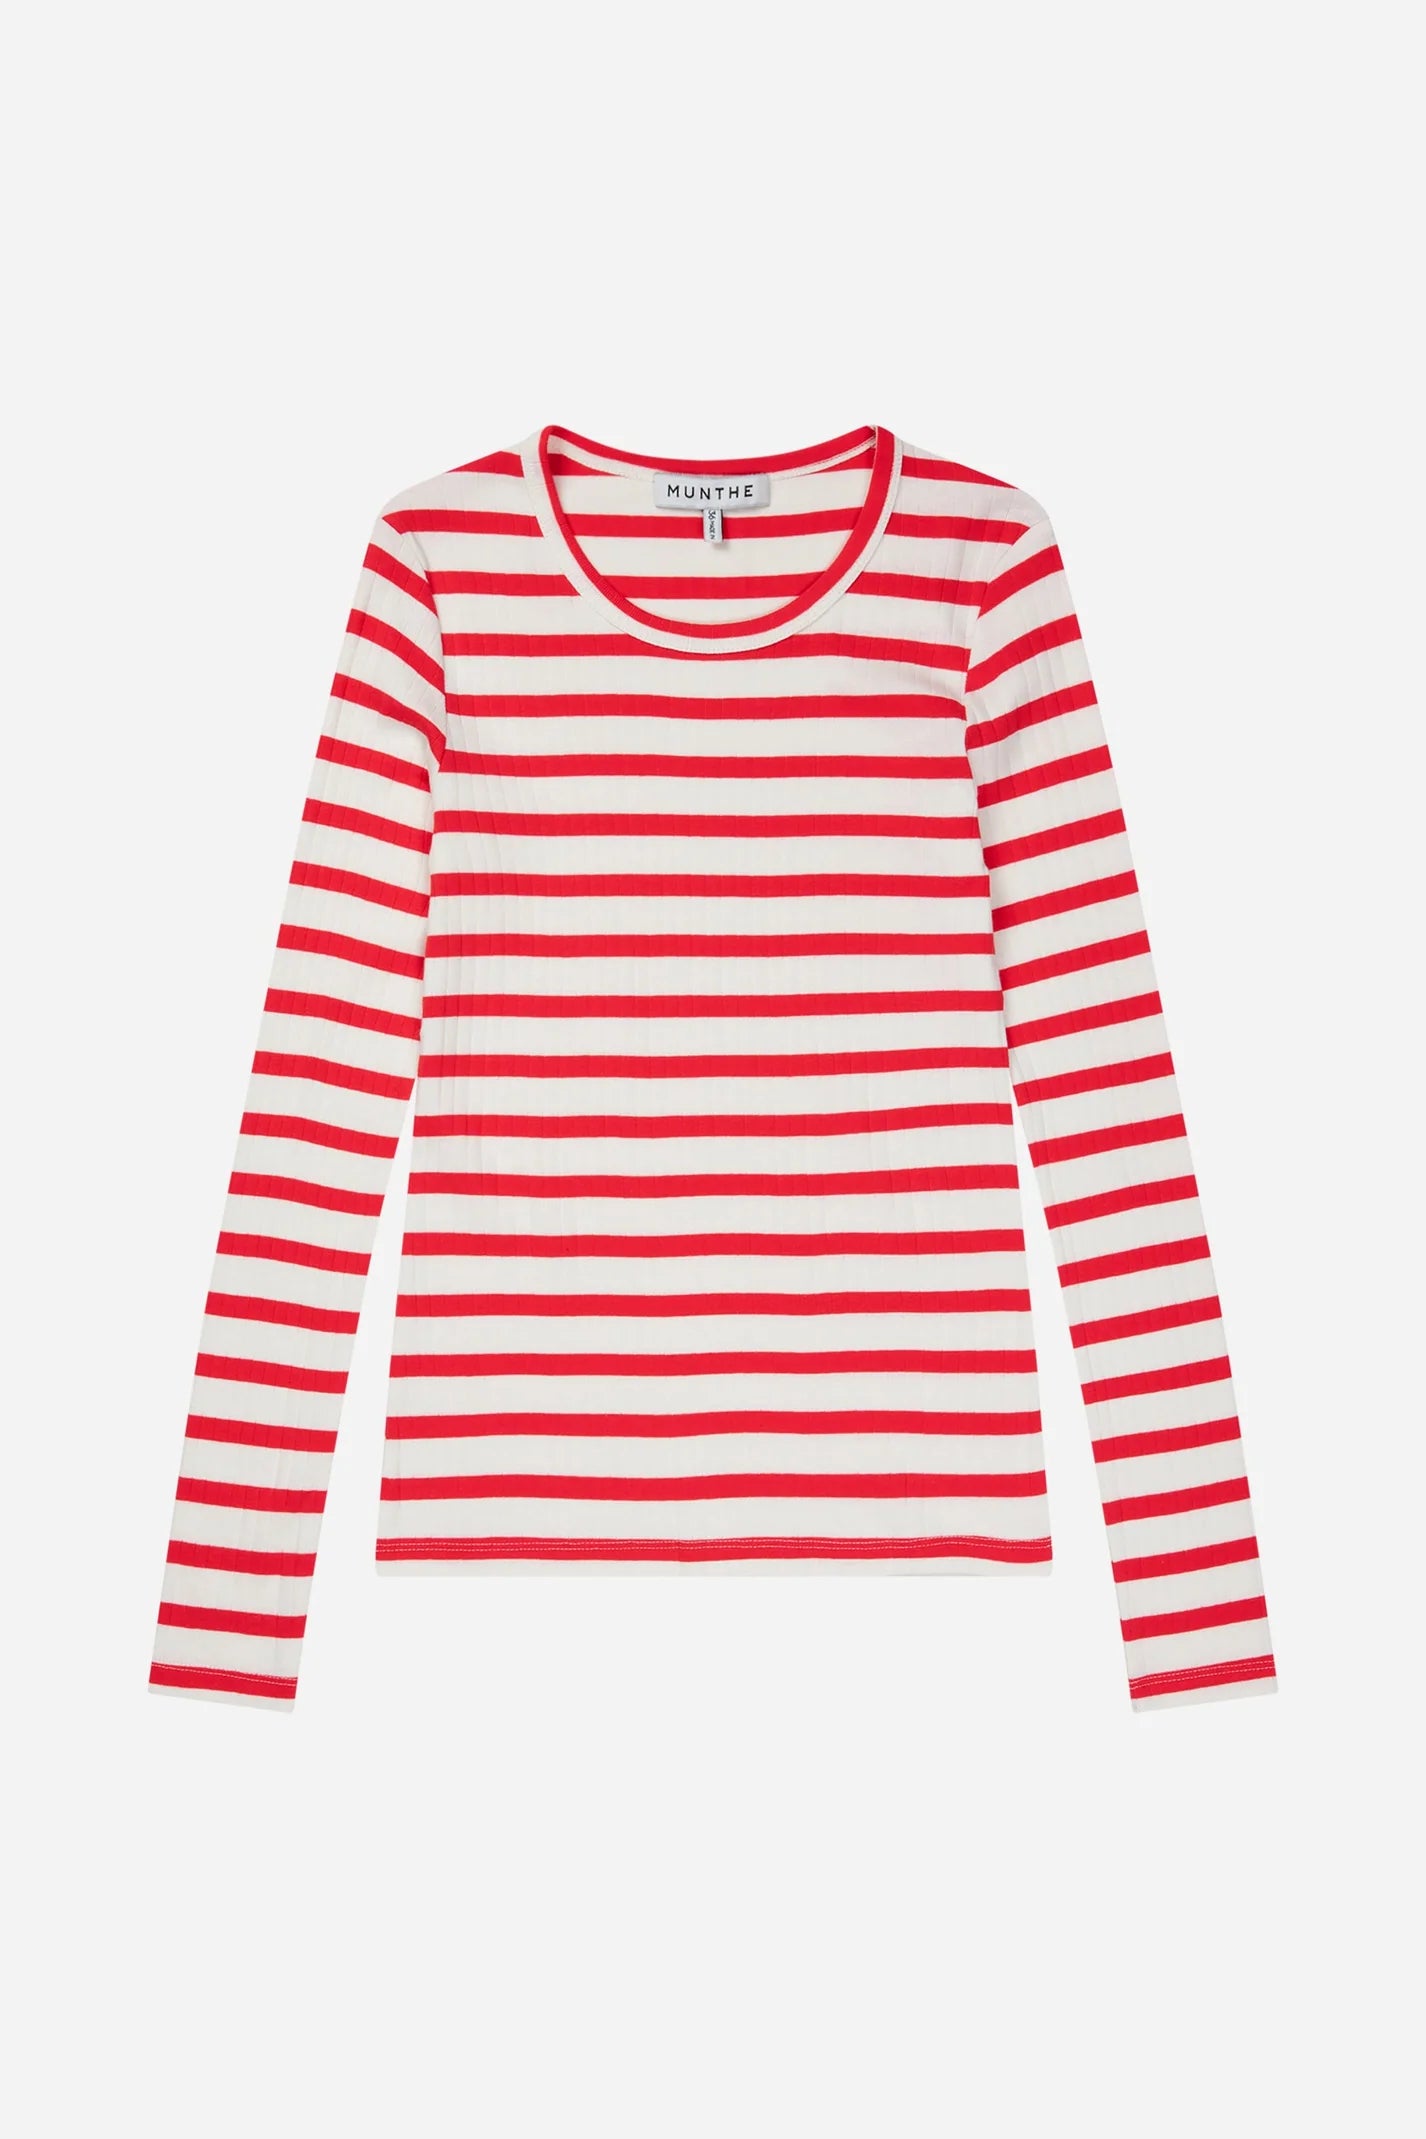 Munthe Jote T-shirt Red